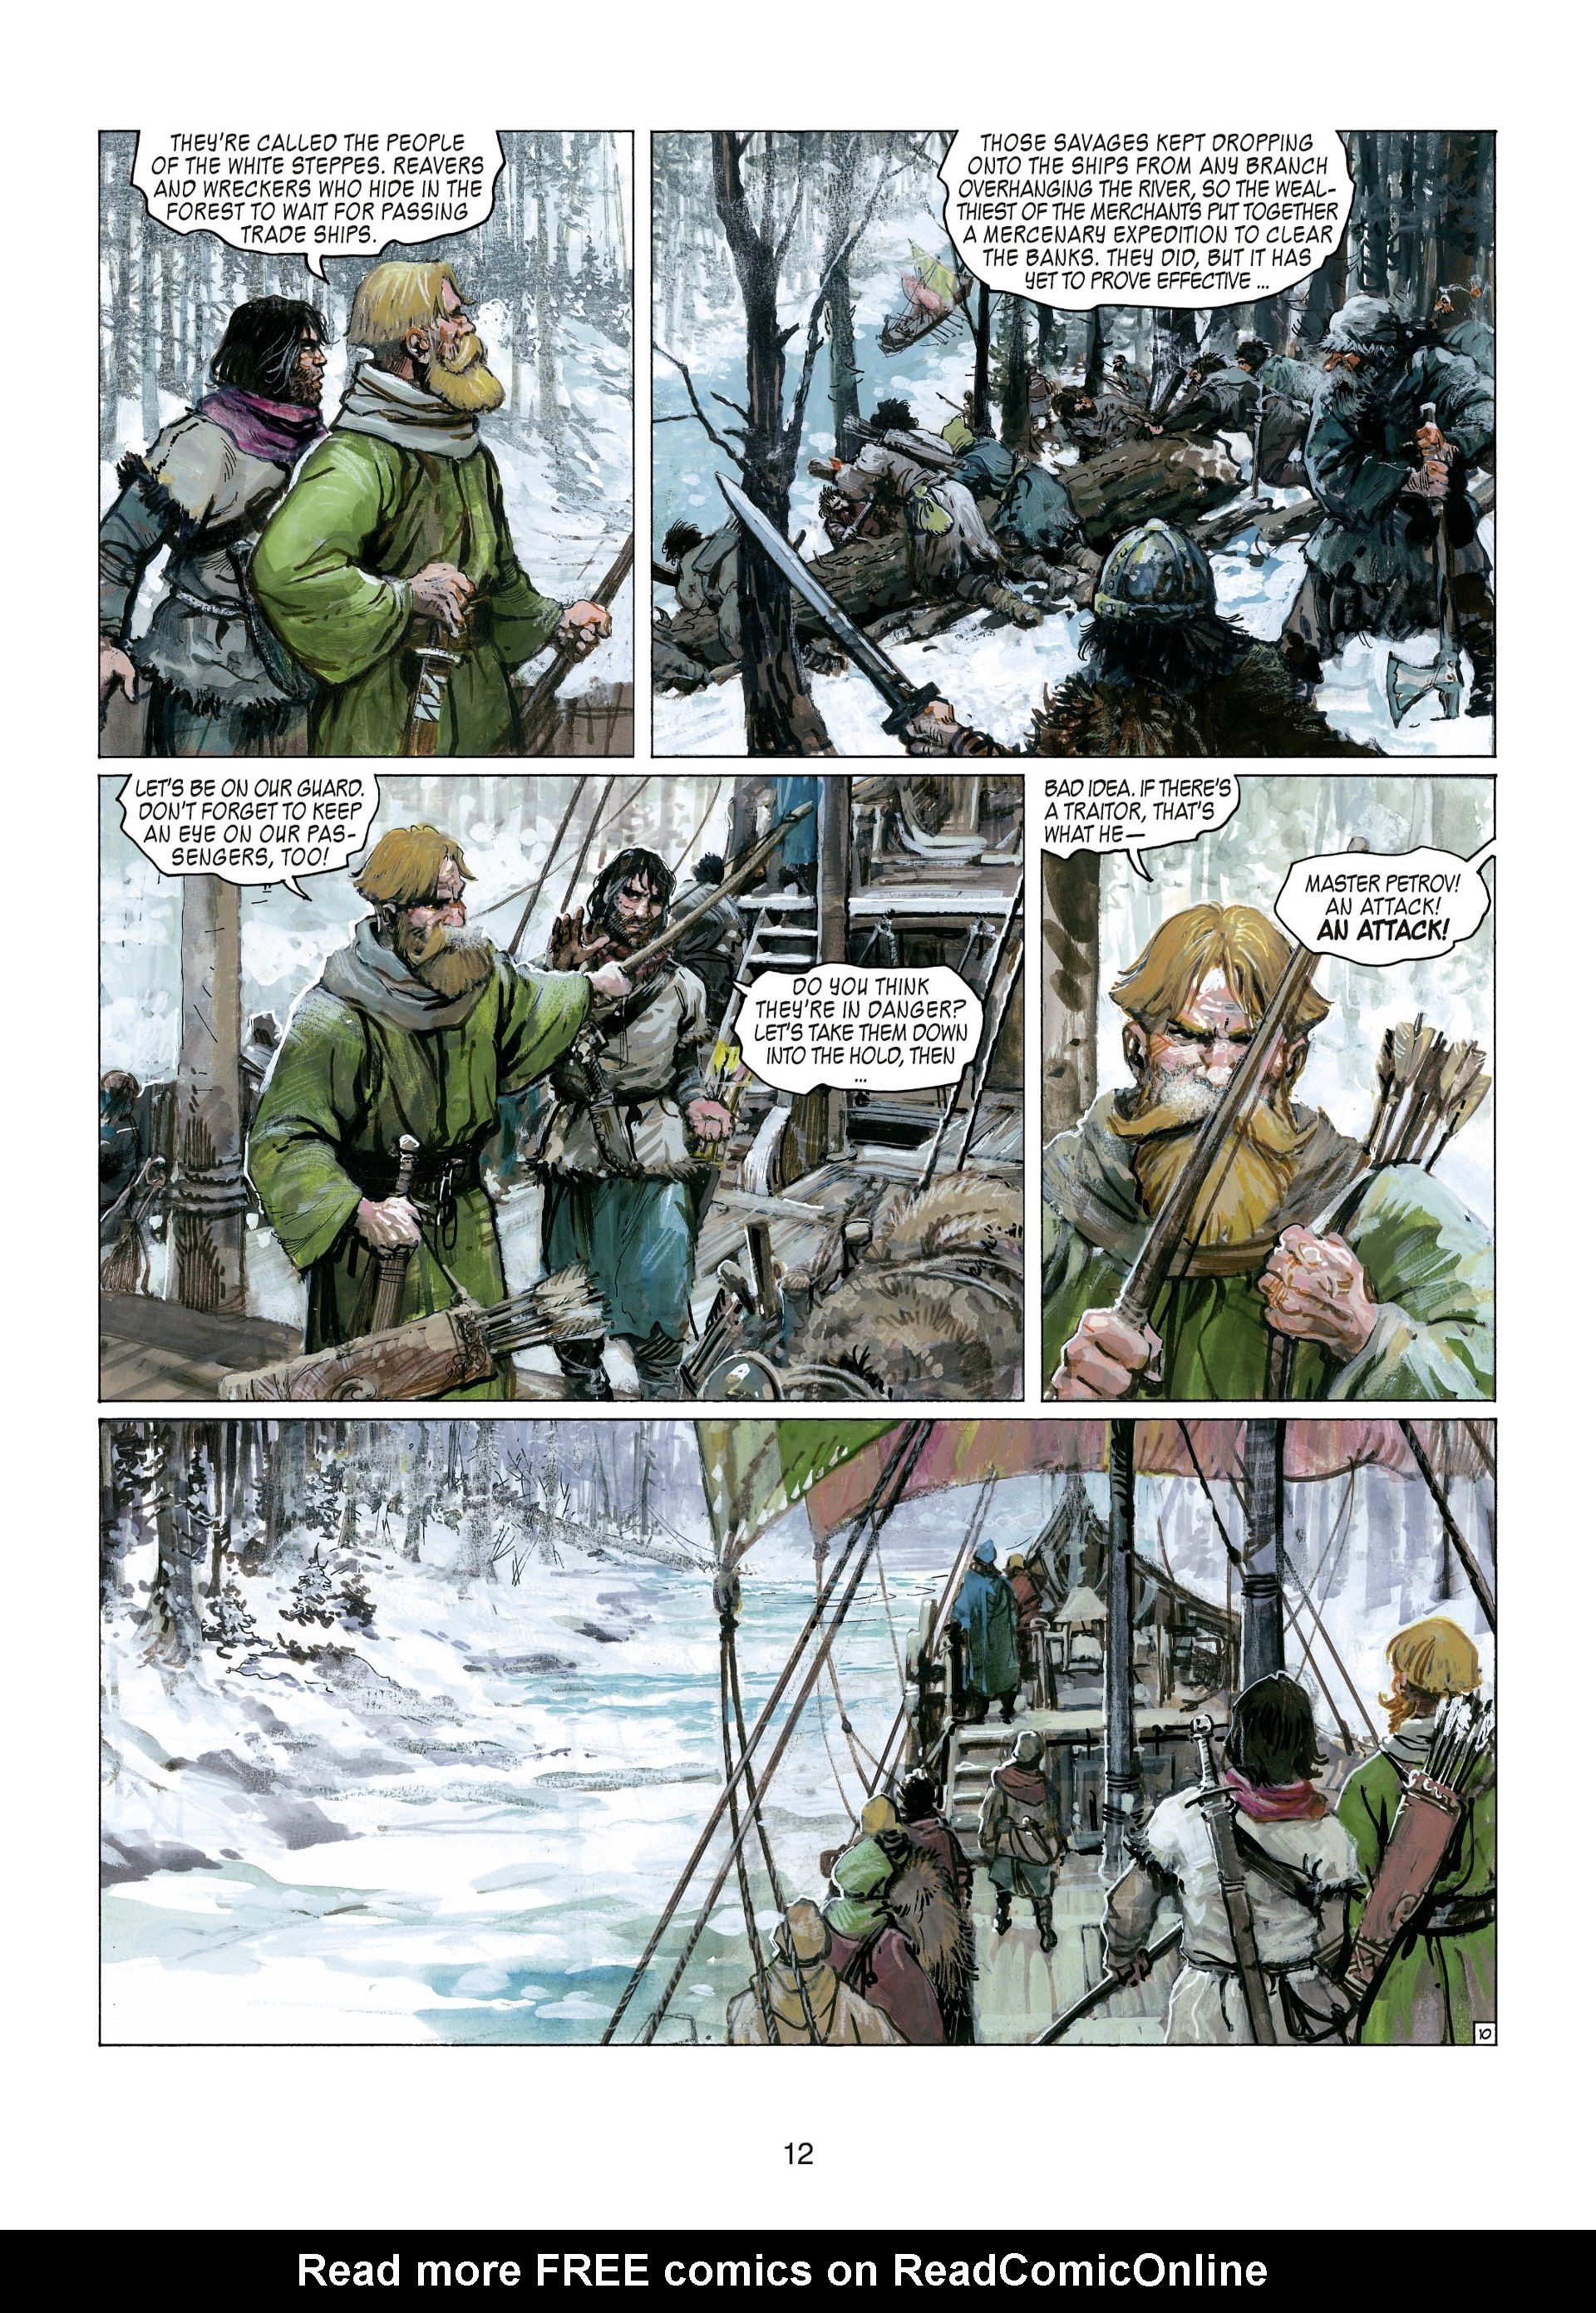 Read online Thorgal comic -  Issue #25 - 14